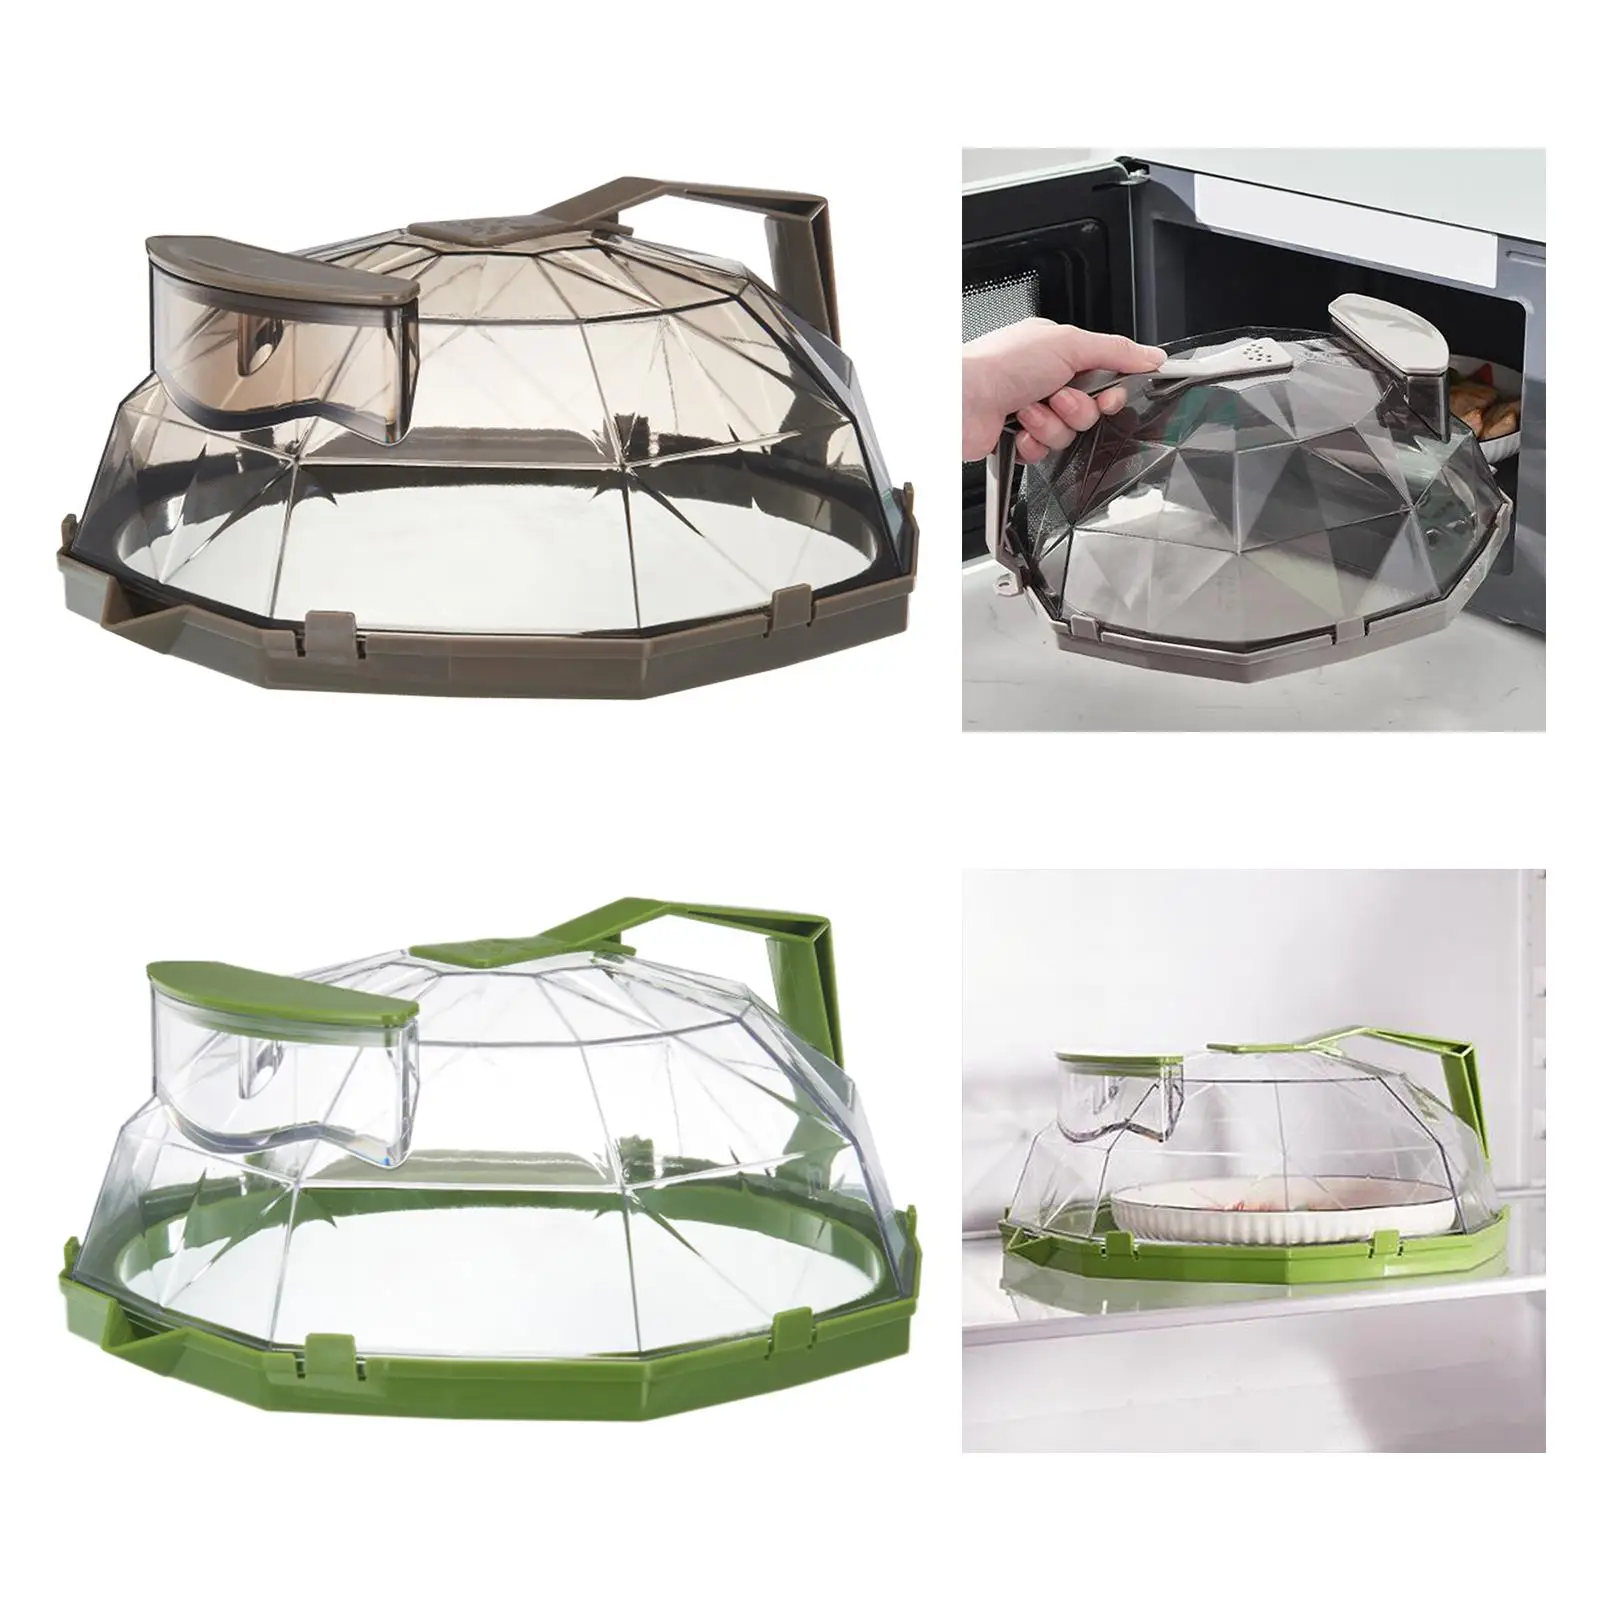 Microwave cover Lid with Water Storage Tank Top Use Below 200 Celsius Degree Use Less Than 4 Minutes Kitchen Gadget Durable